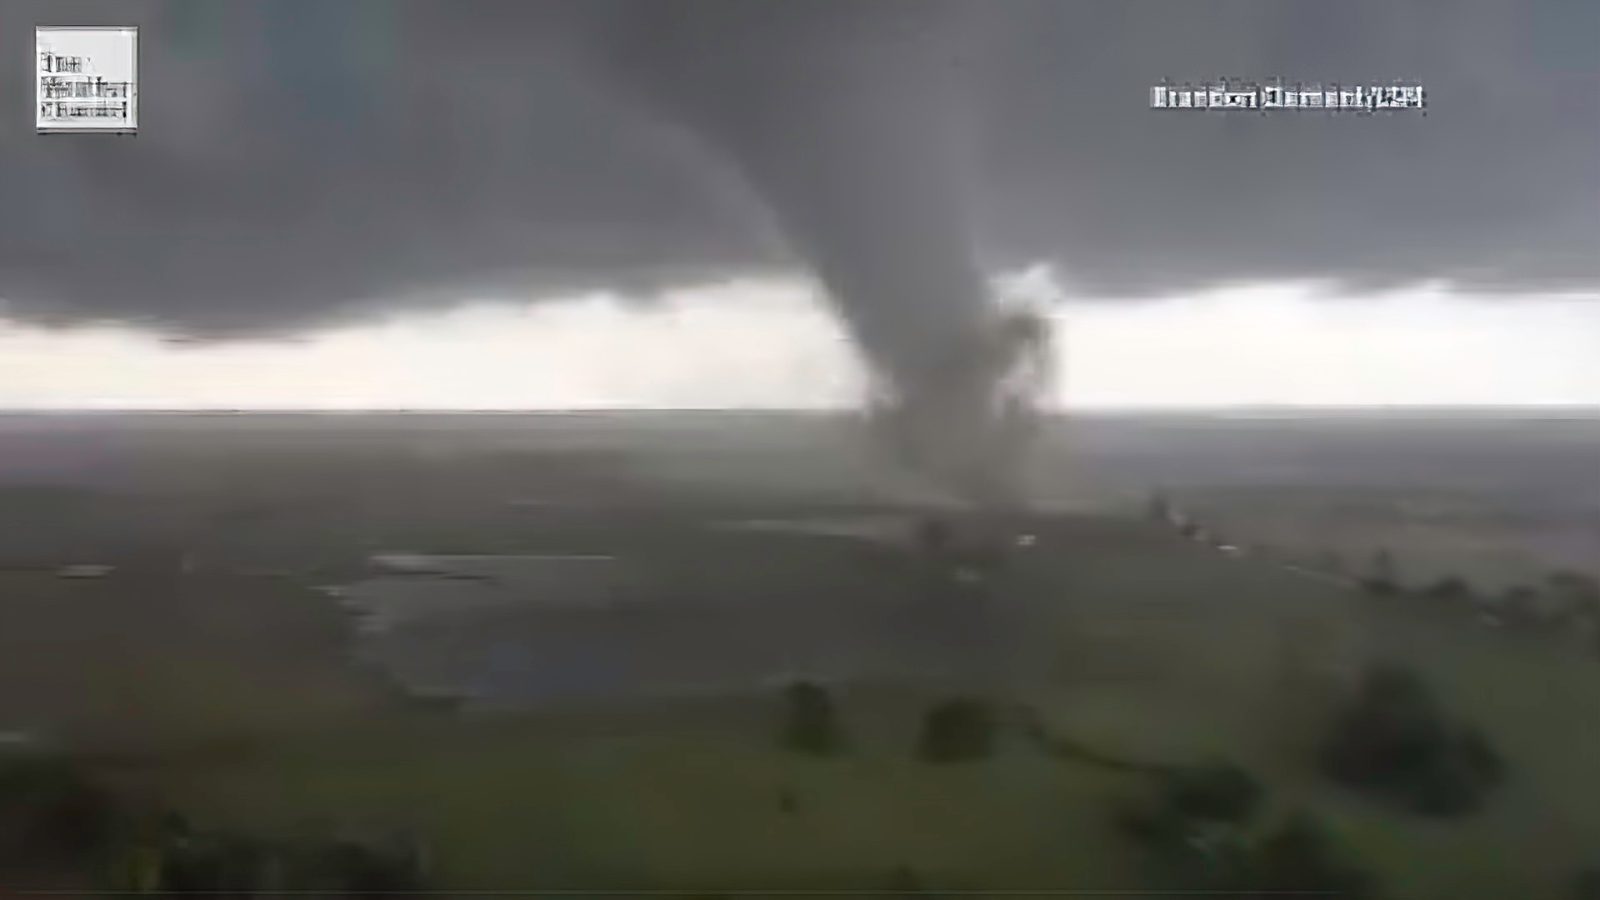 Drone captures dramatic footage of a tornado in Canton, TX [video]